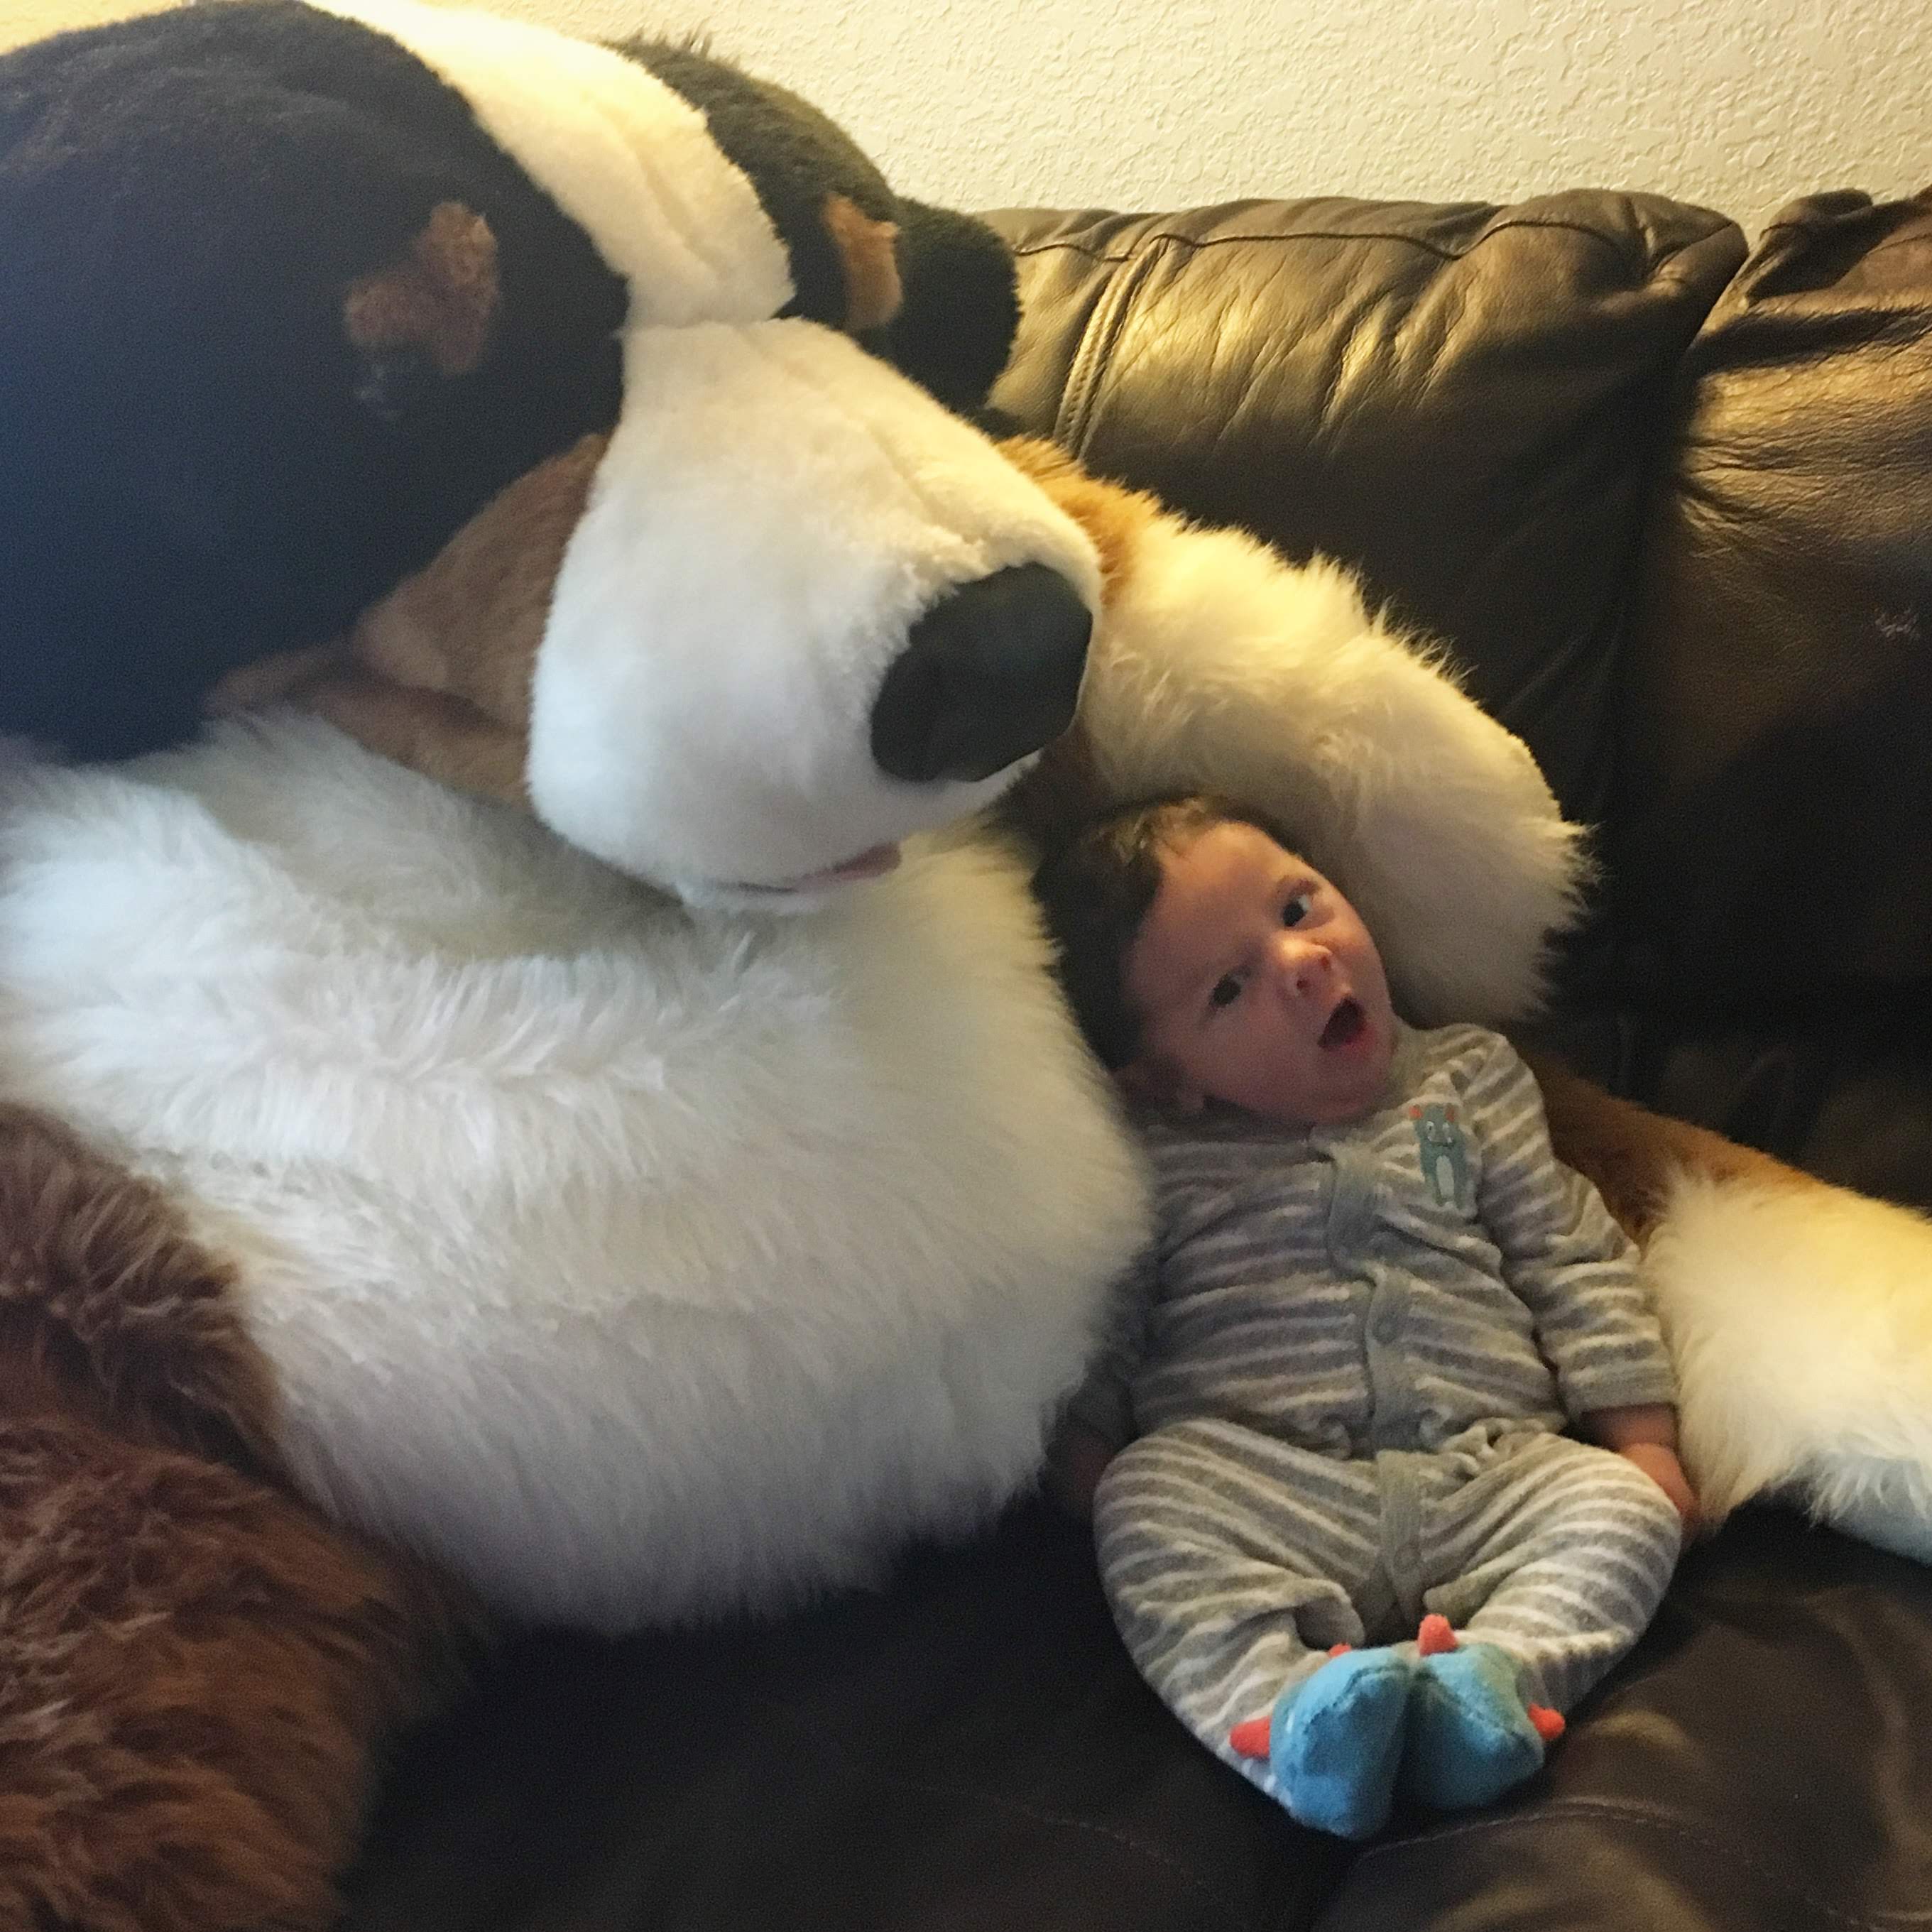 A picture of a baby with a giant stuffed dog.